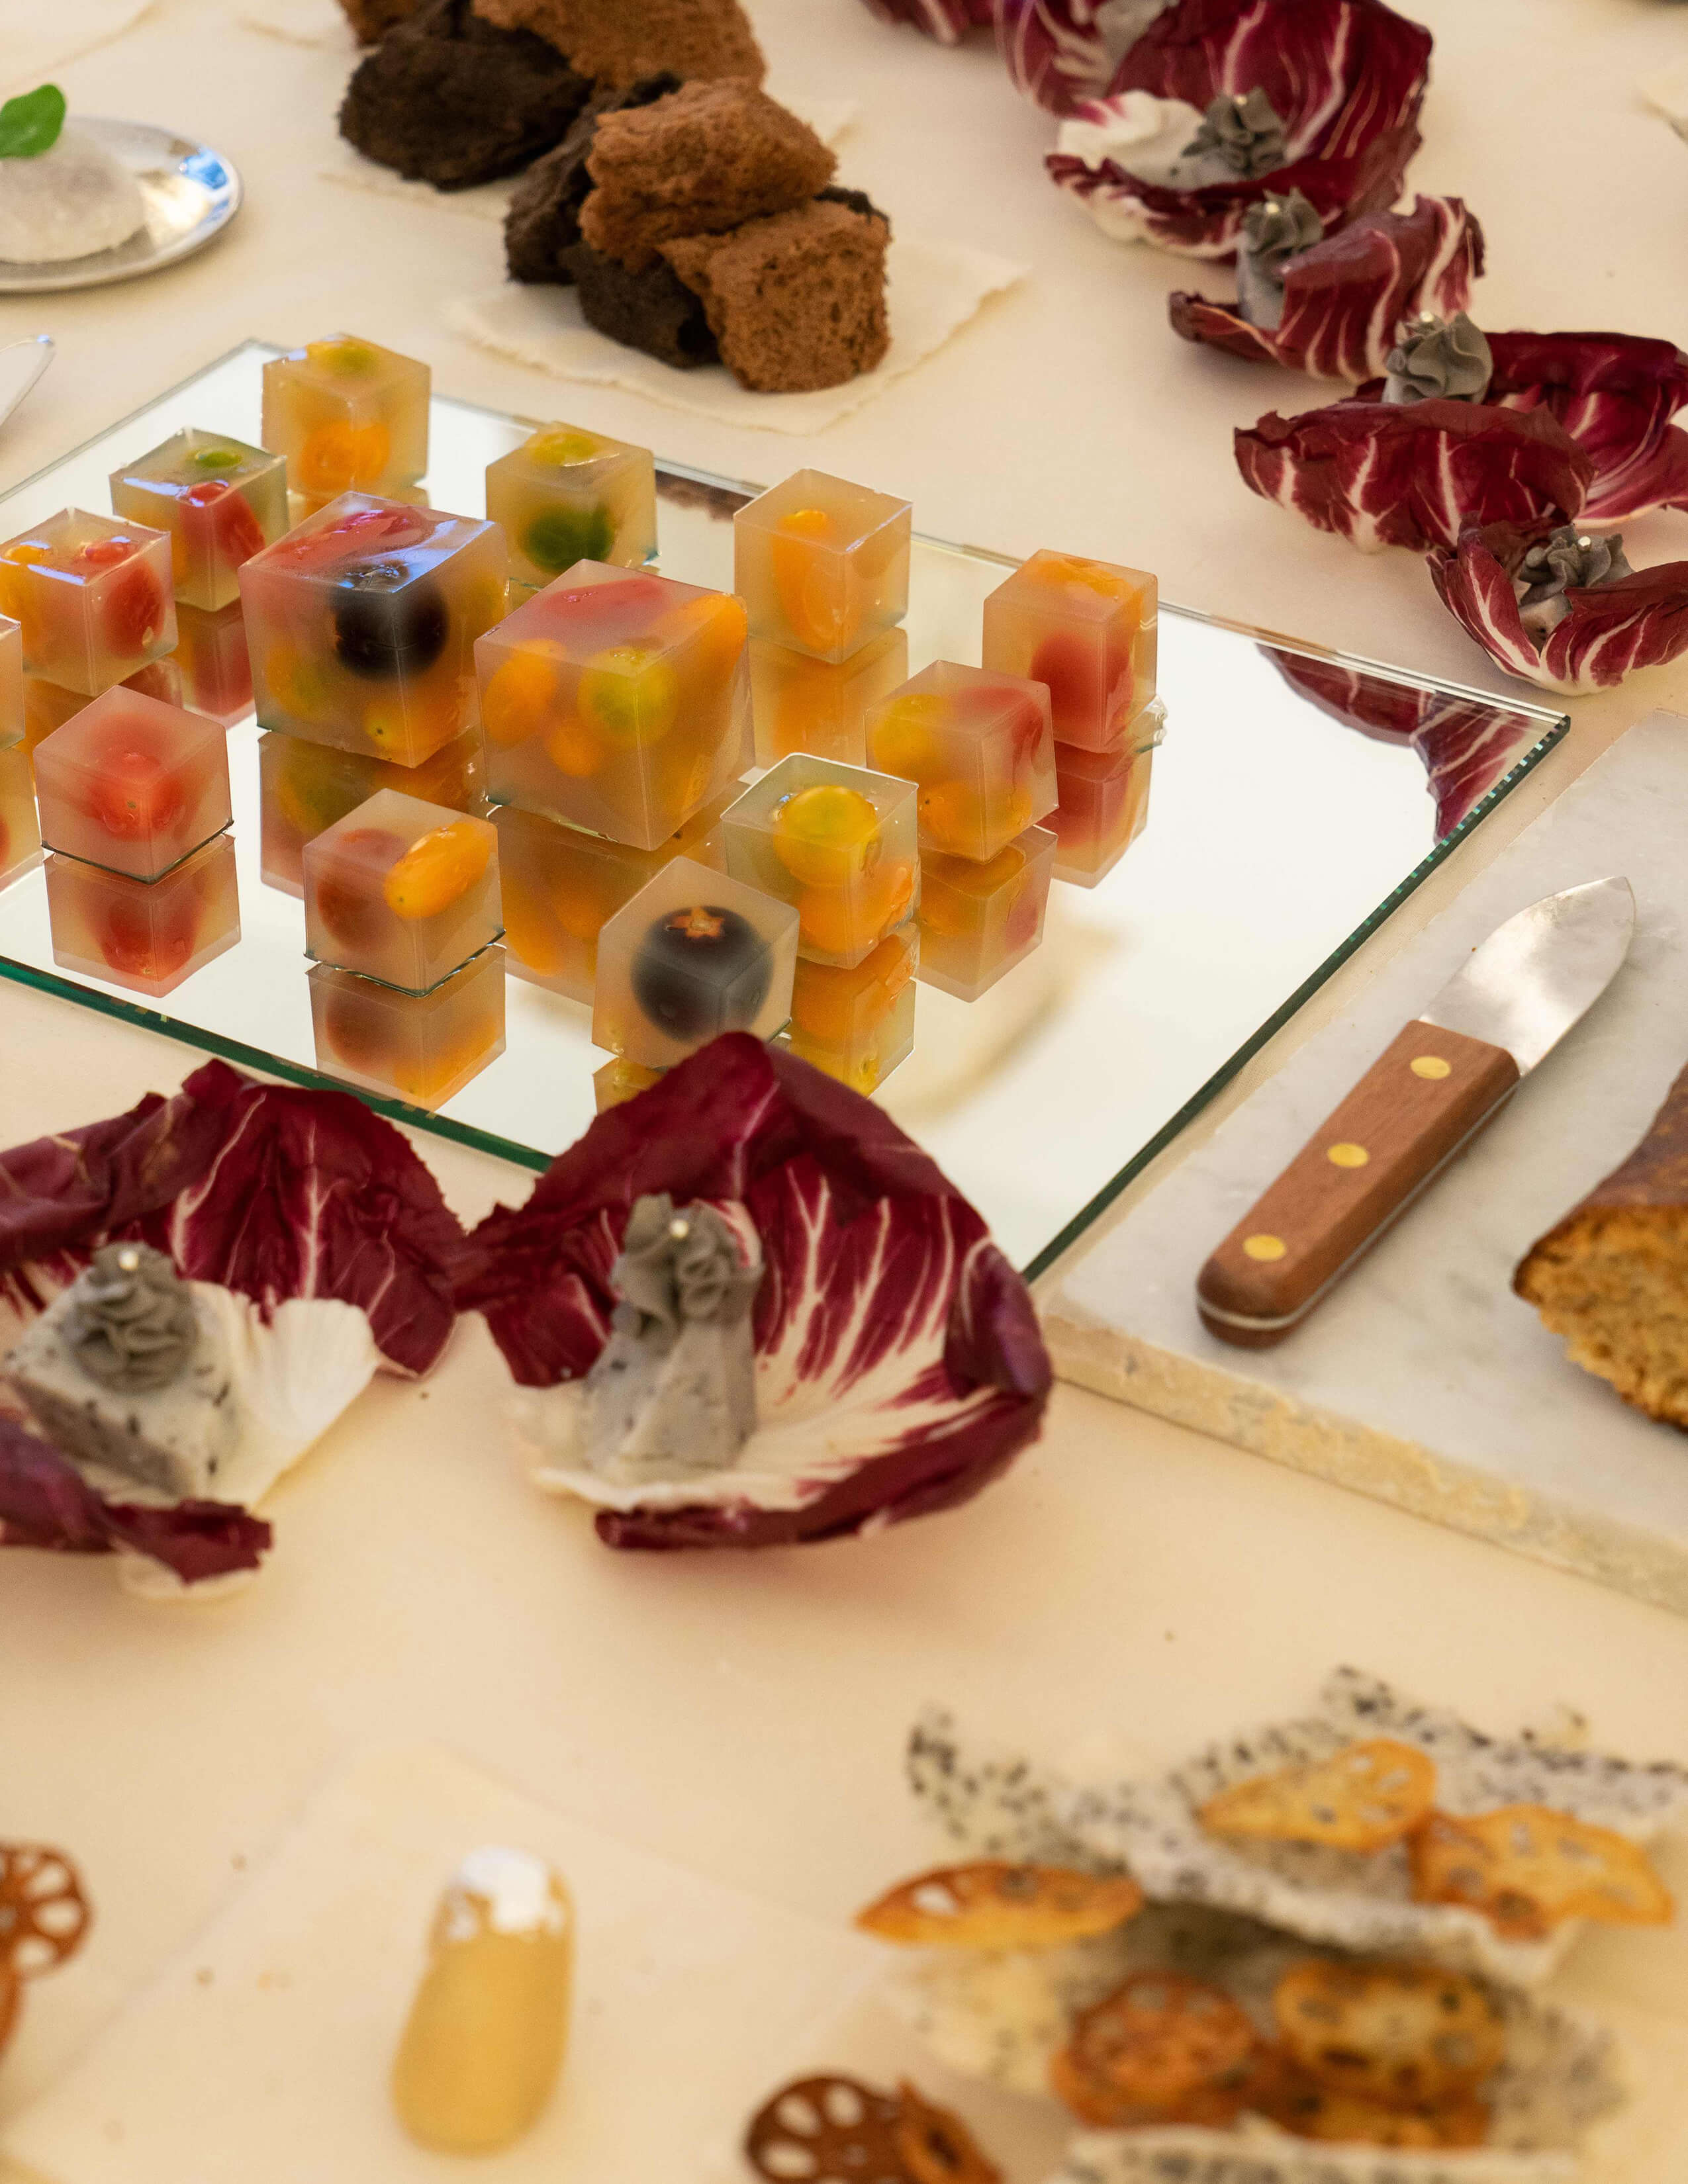 Loads of small jelly cubes filled with different shapes of fruits are served on the glass board next to a bread knife and there are differentfoodsd served on pieces of purple leaves.